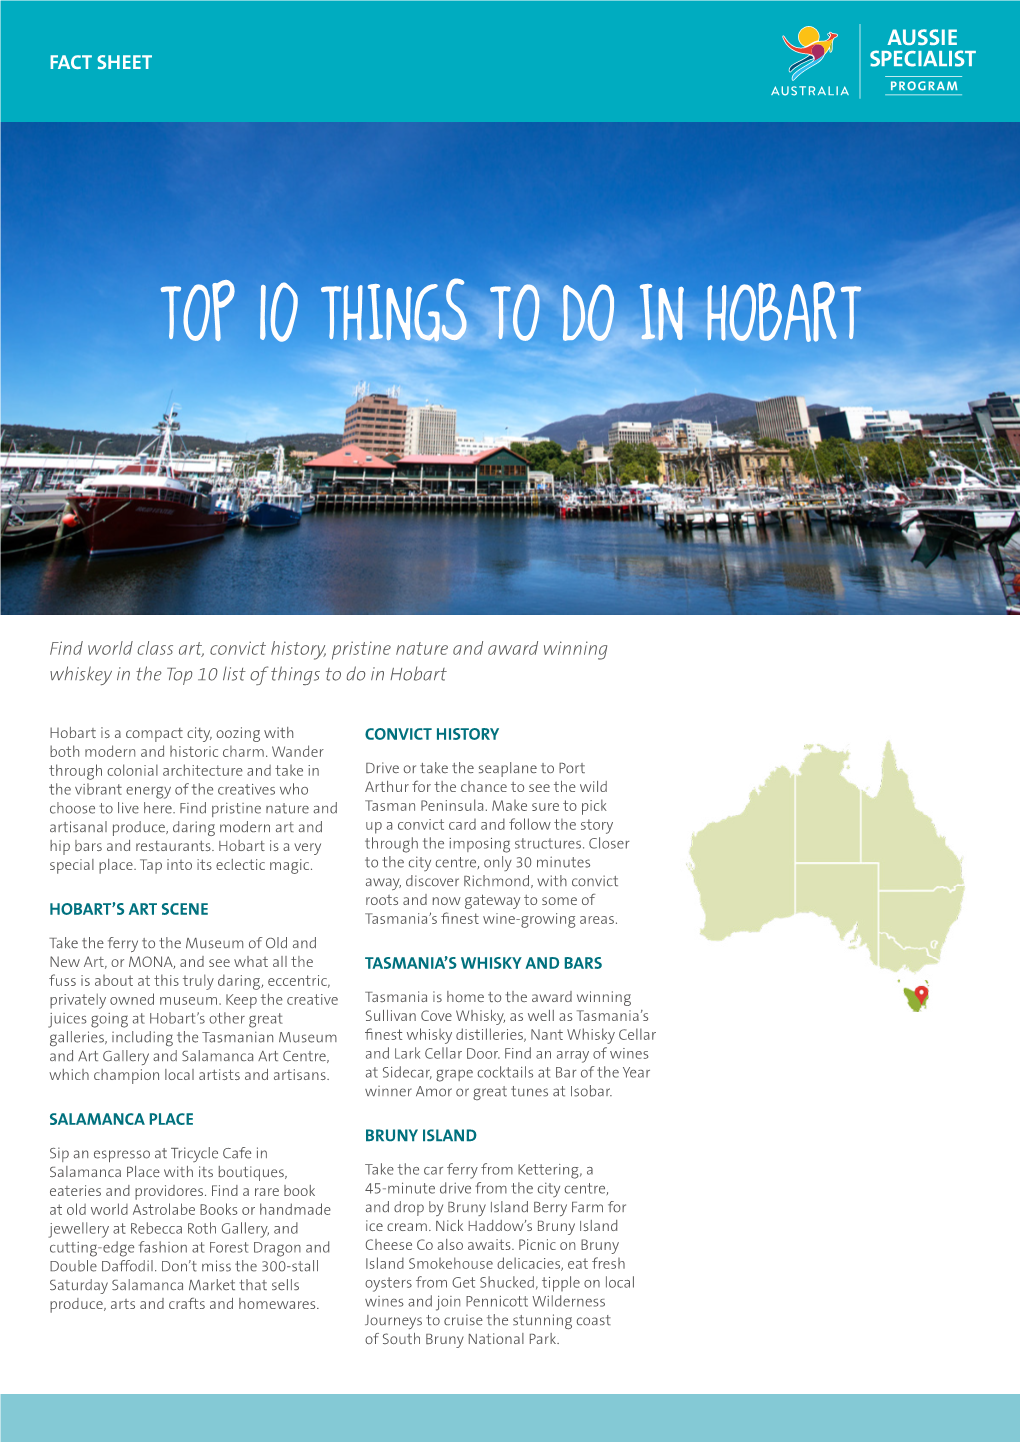 Top 10 Things to Do in Hobart